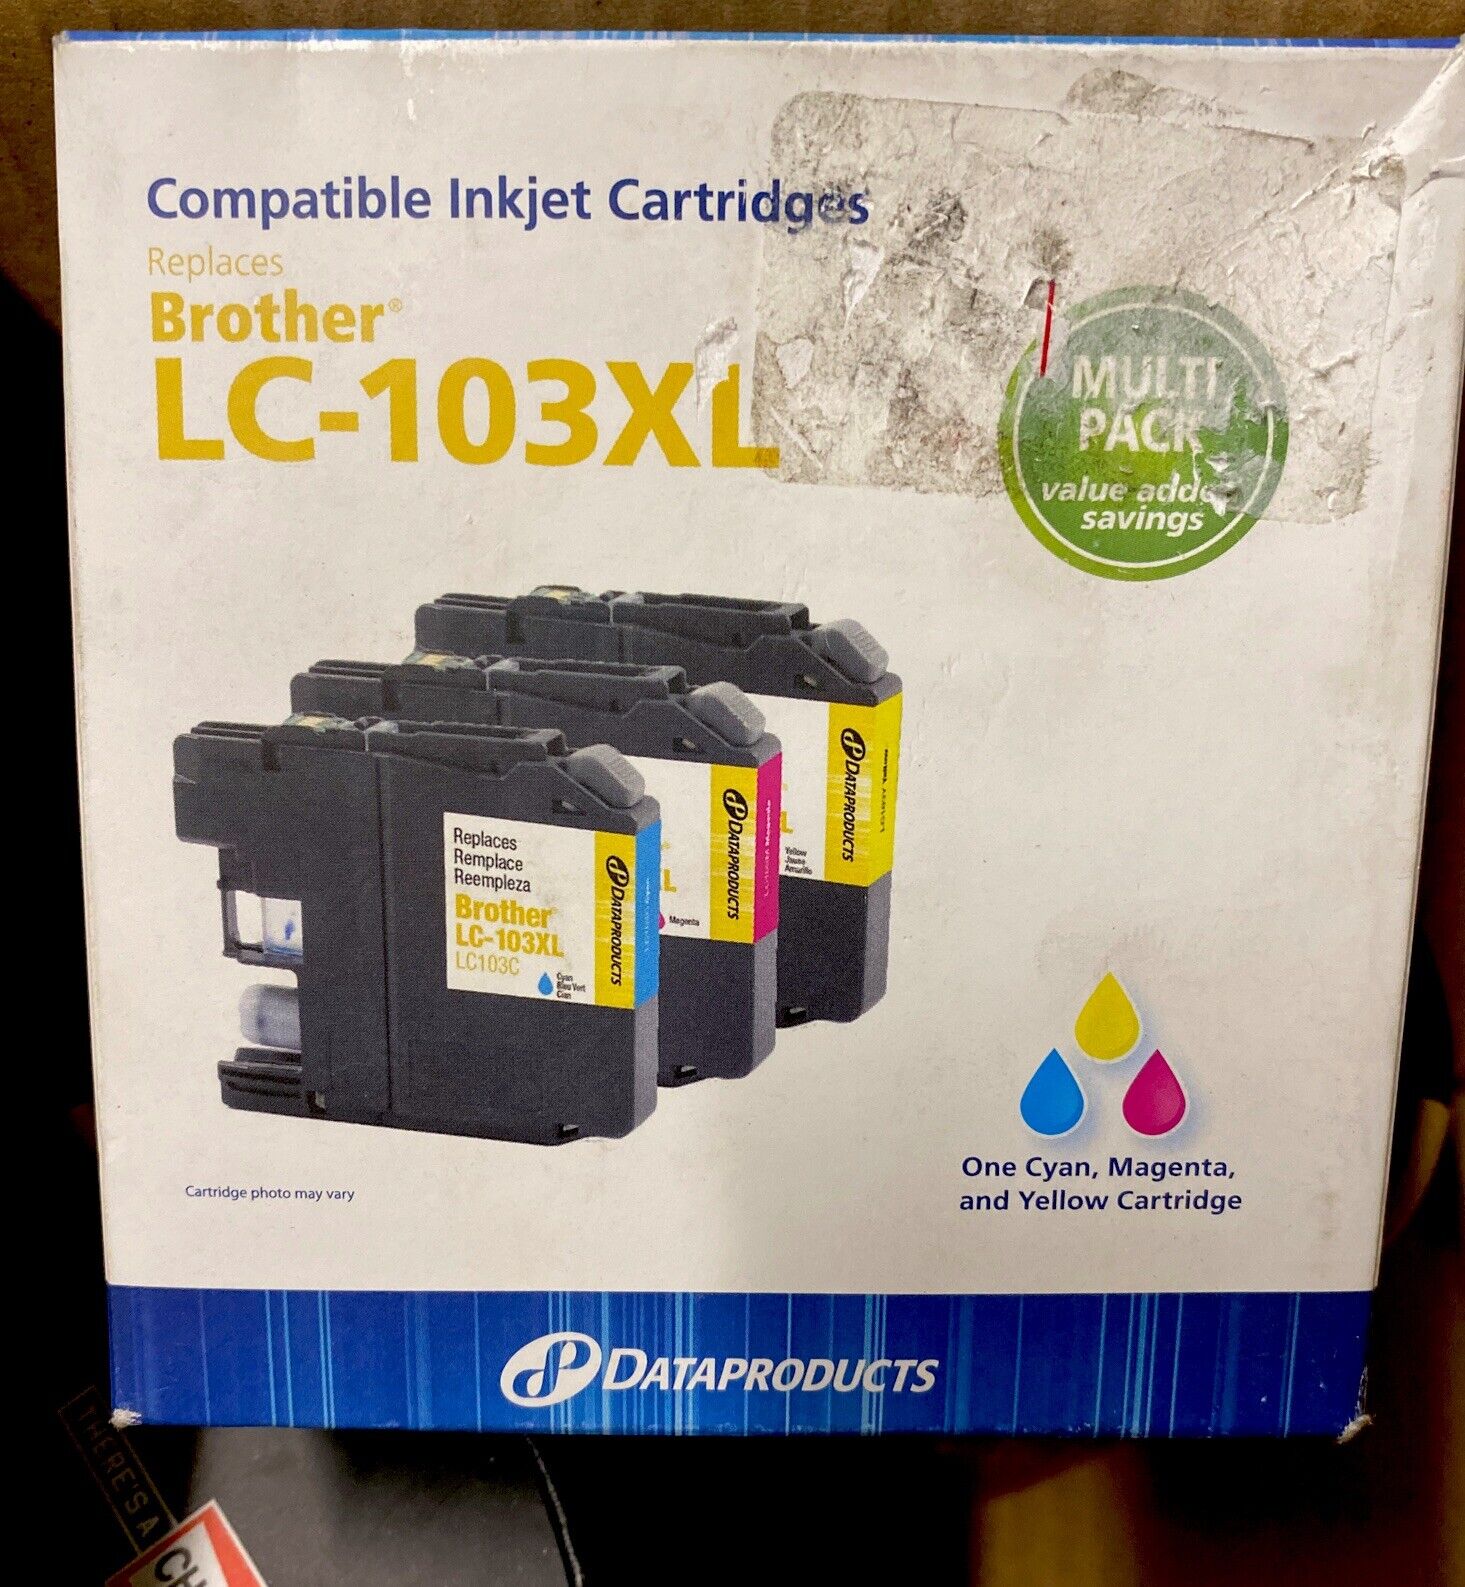 Data Products DPCLC103B Ink Jet Cartridge Multi Pack Replaces Brother LC-103XL